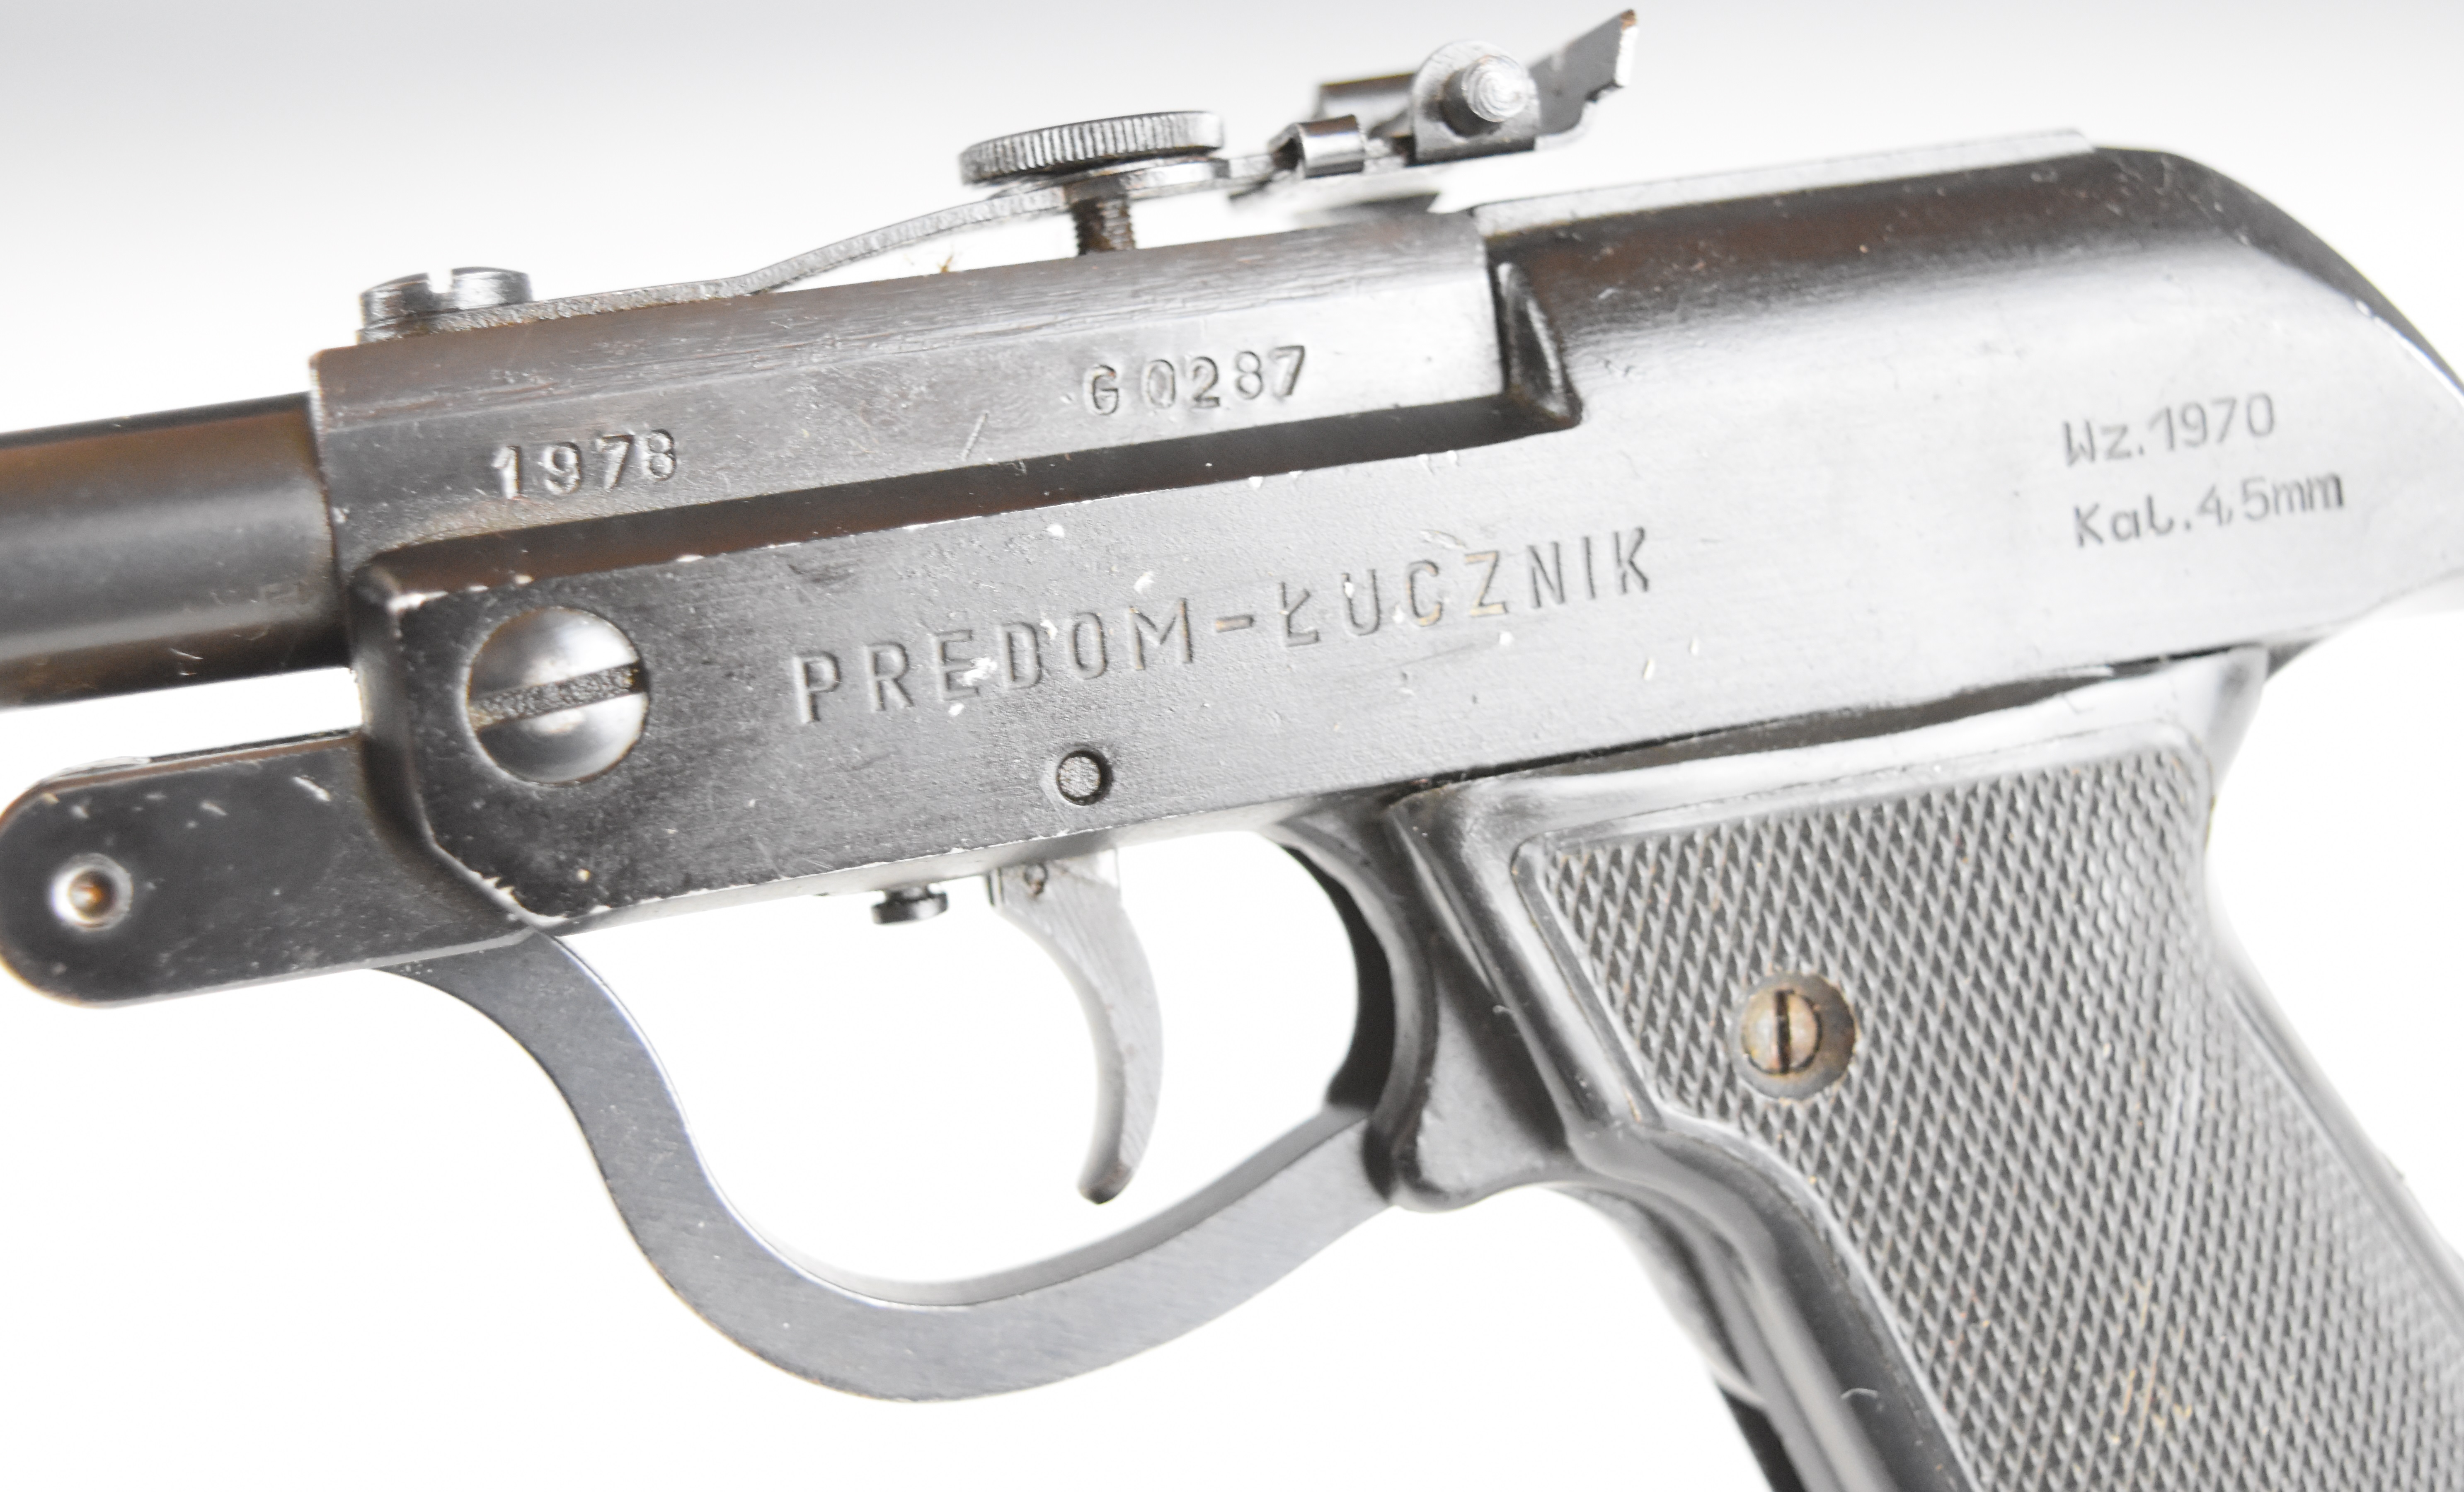 Polish Predom Lucznik model 1970 .177 Polish Army training target air pistol dated 1978 with - Image 8 of 12